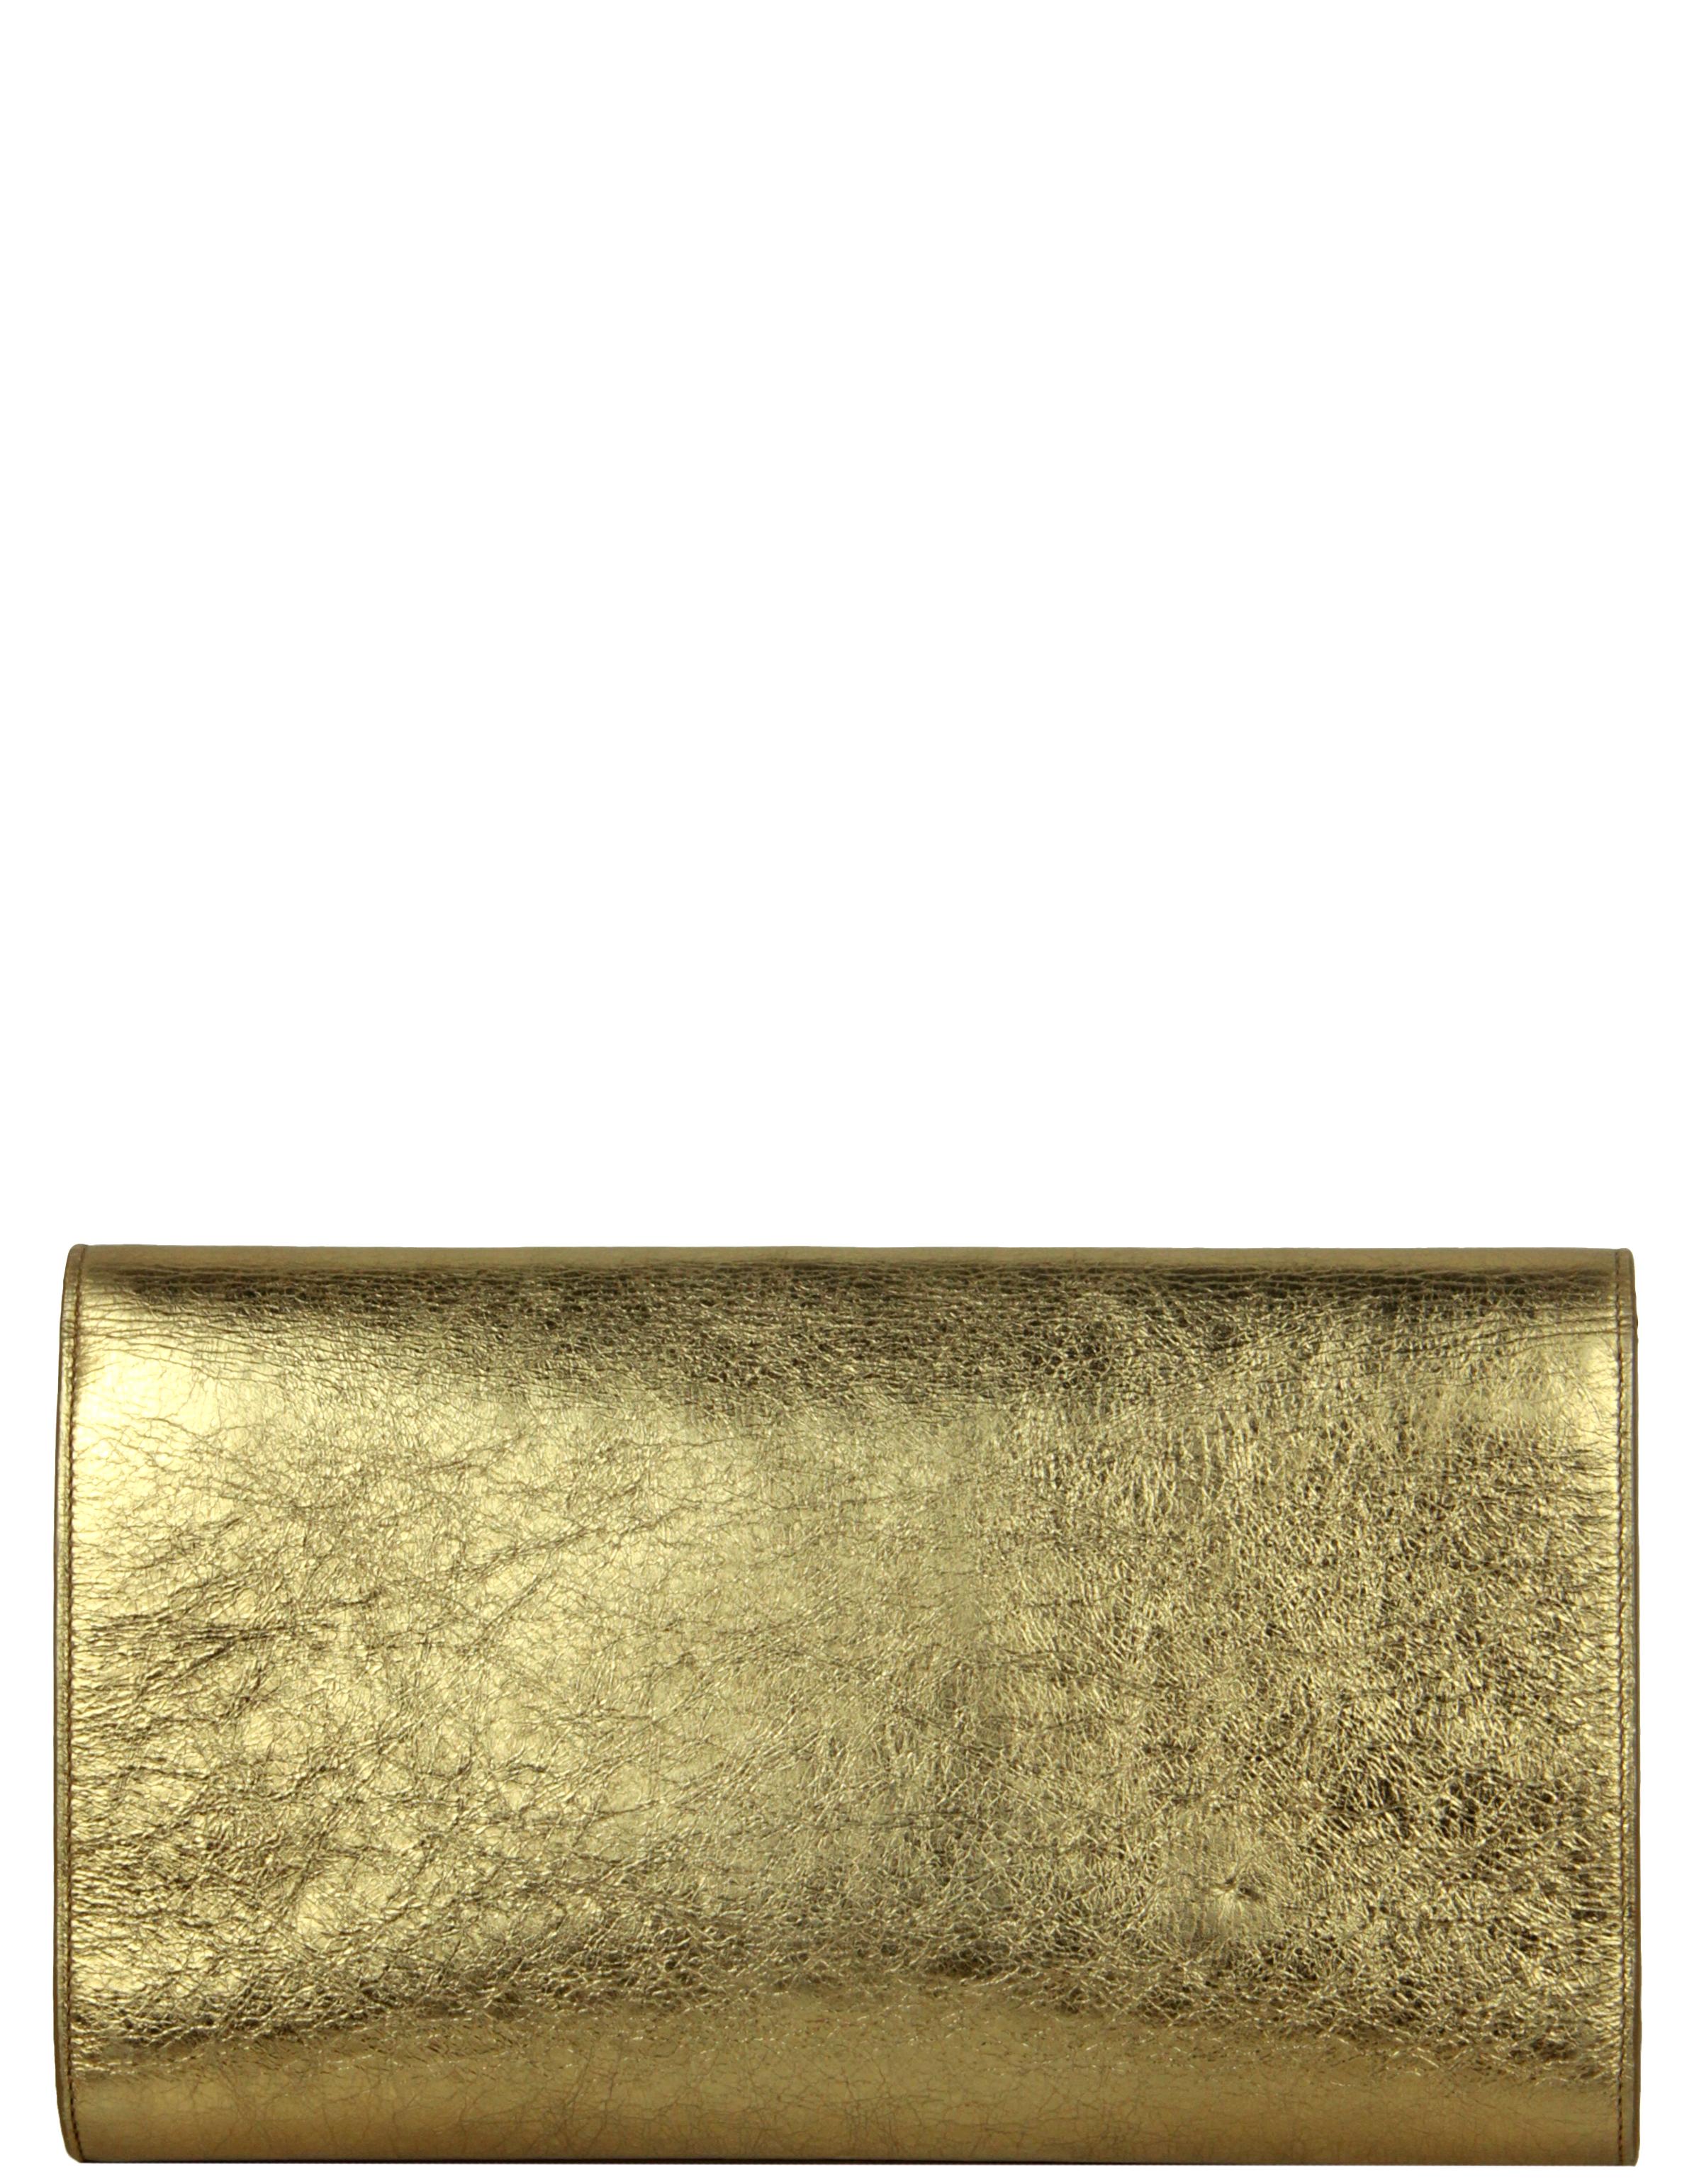 Yves Saint Laurent YSL Gold Large Belle De Jour Clutch Bag In Good Condition In New York, NY